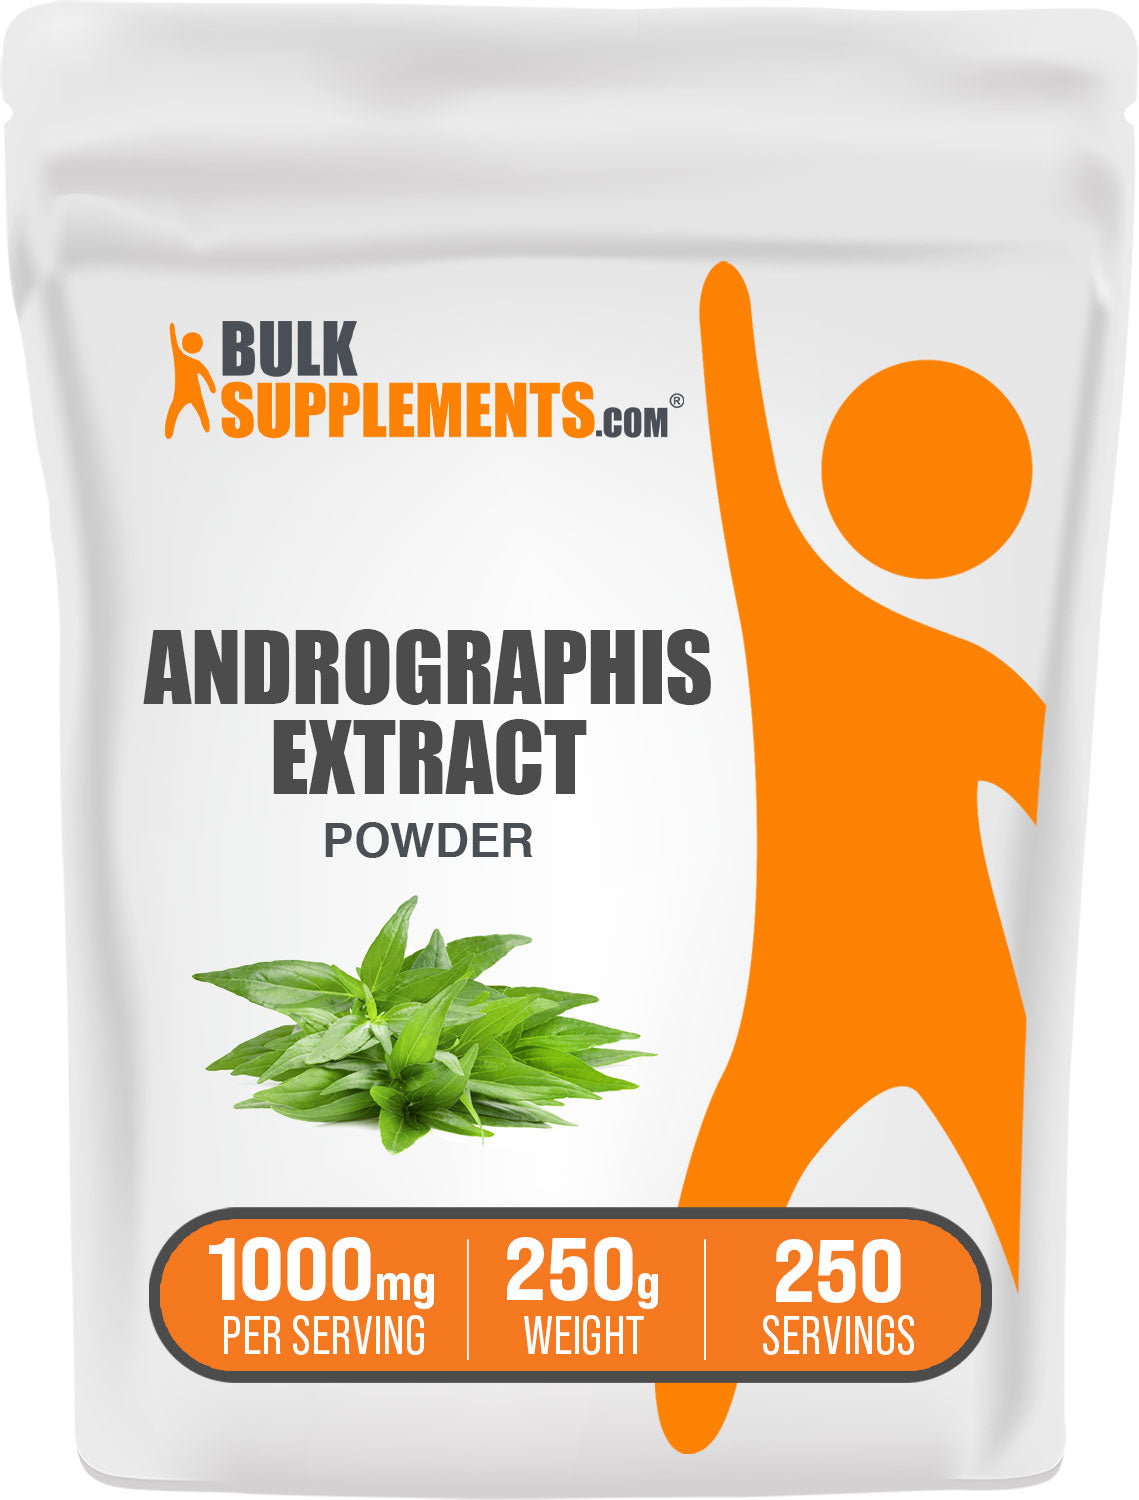 BulkSupplements.com Andrographis Extract Powder 250g Bag